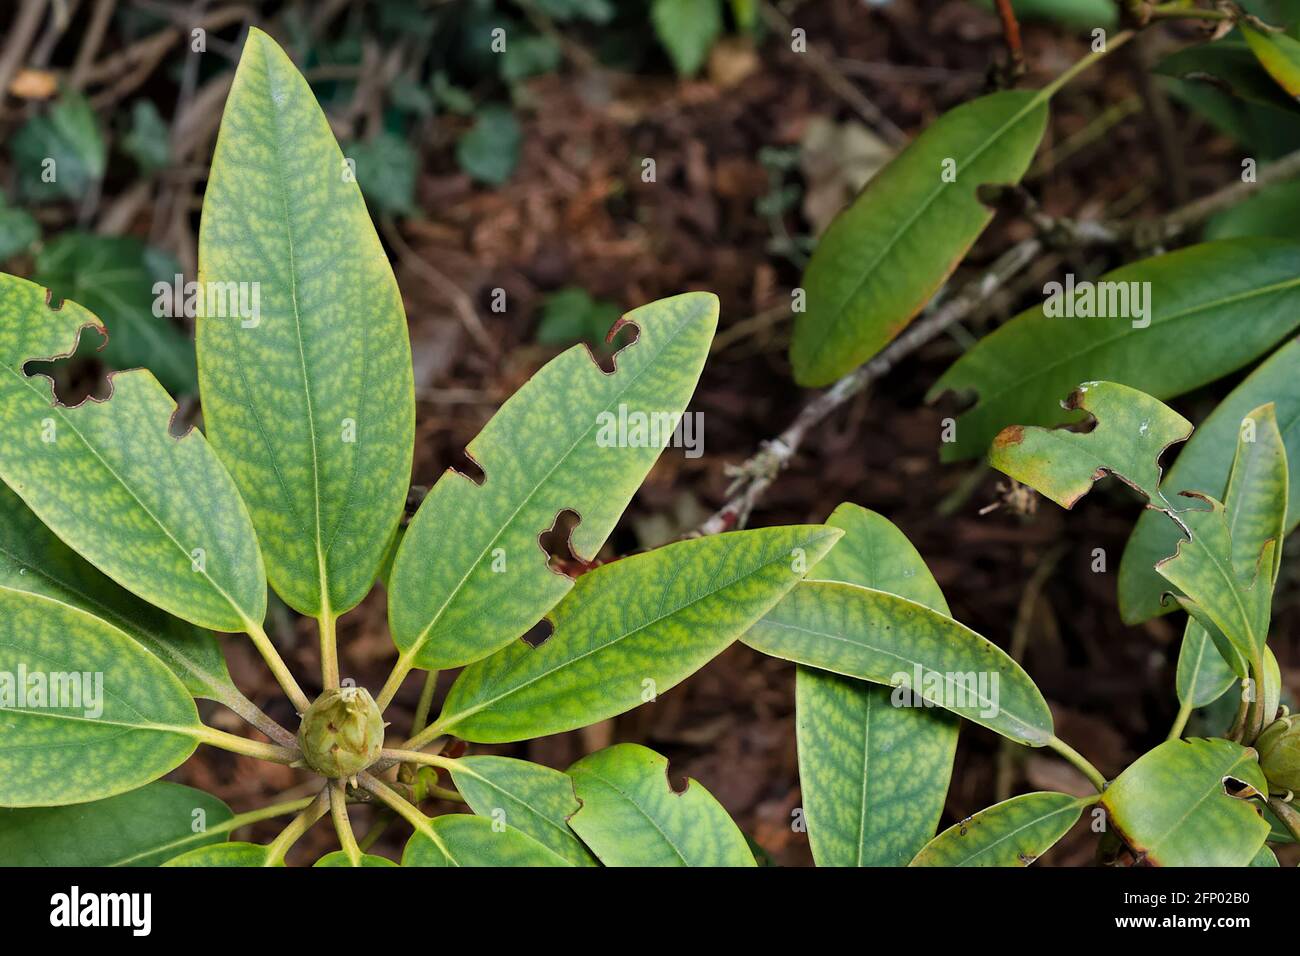 Rhododendron's leaves damaged by the disease in the spring garden Stock Photo